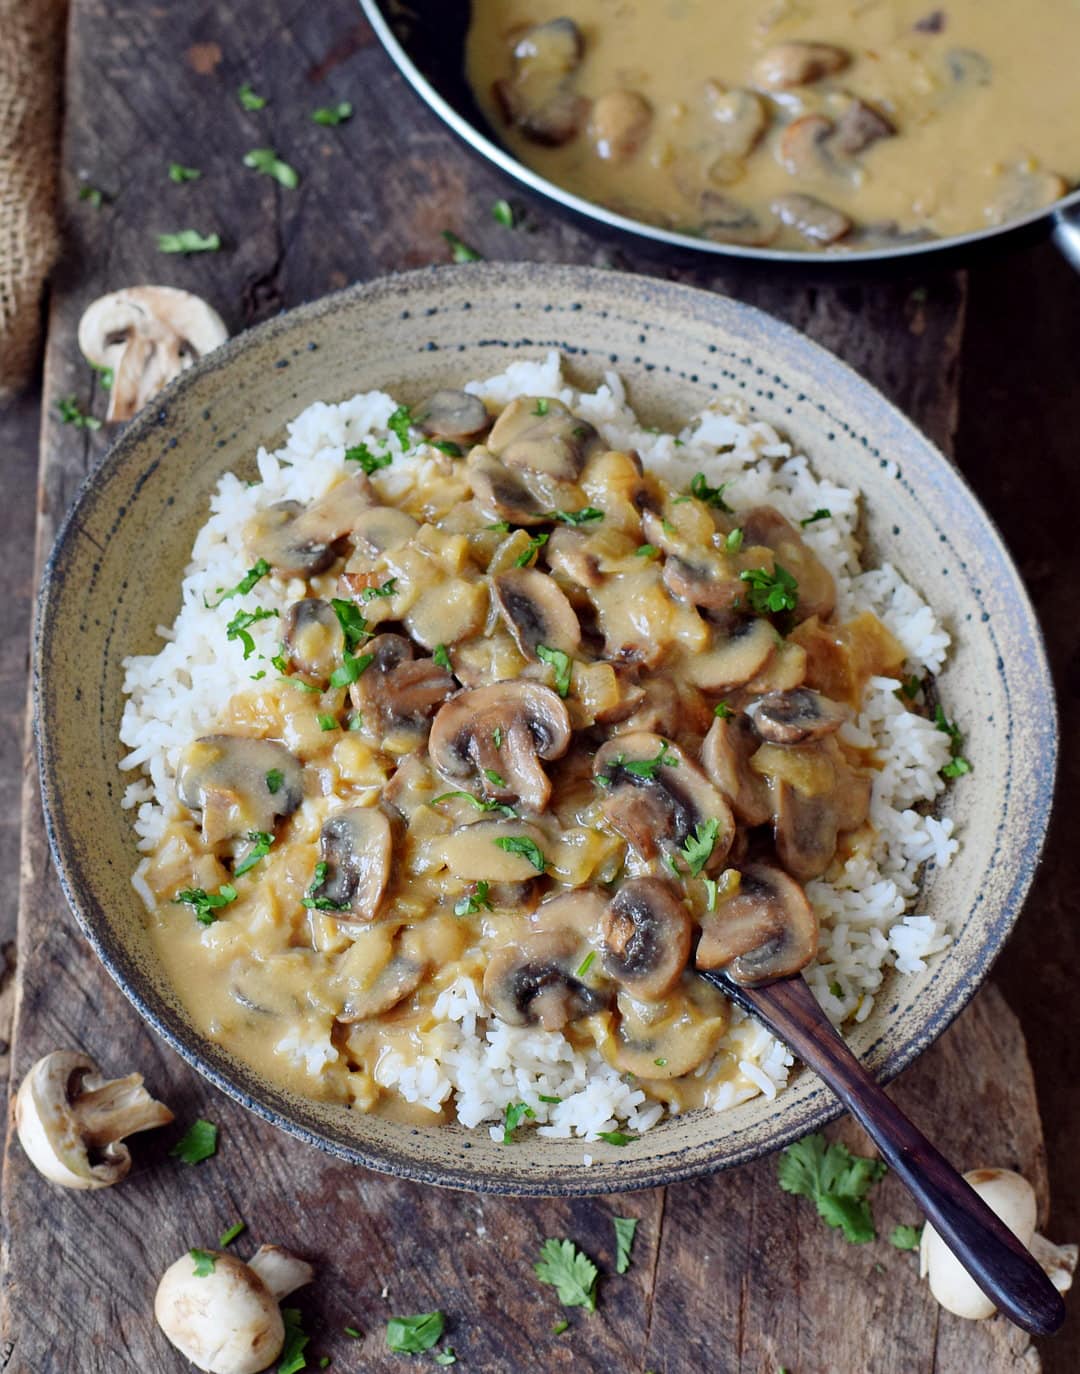 mushroom stroganoff over rice in a bowl with spoon